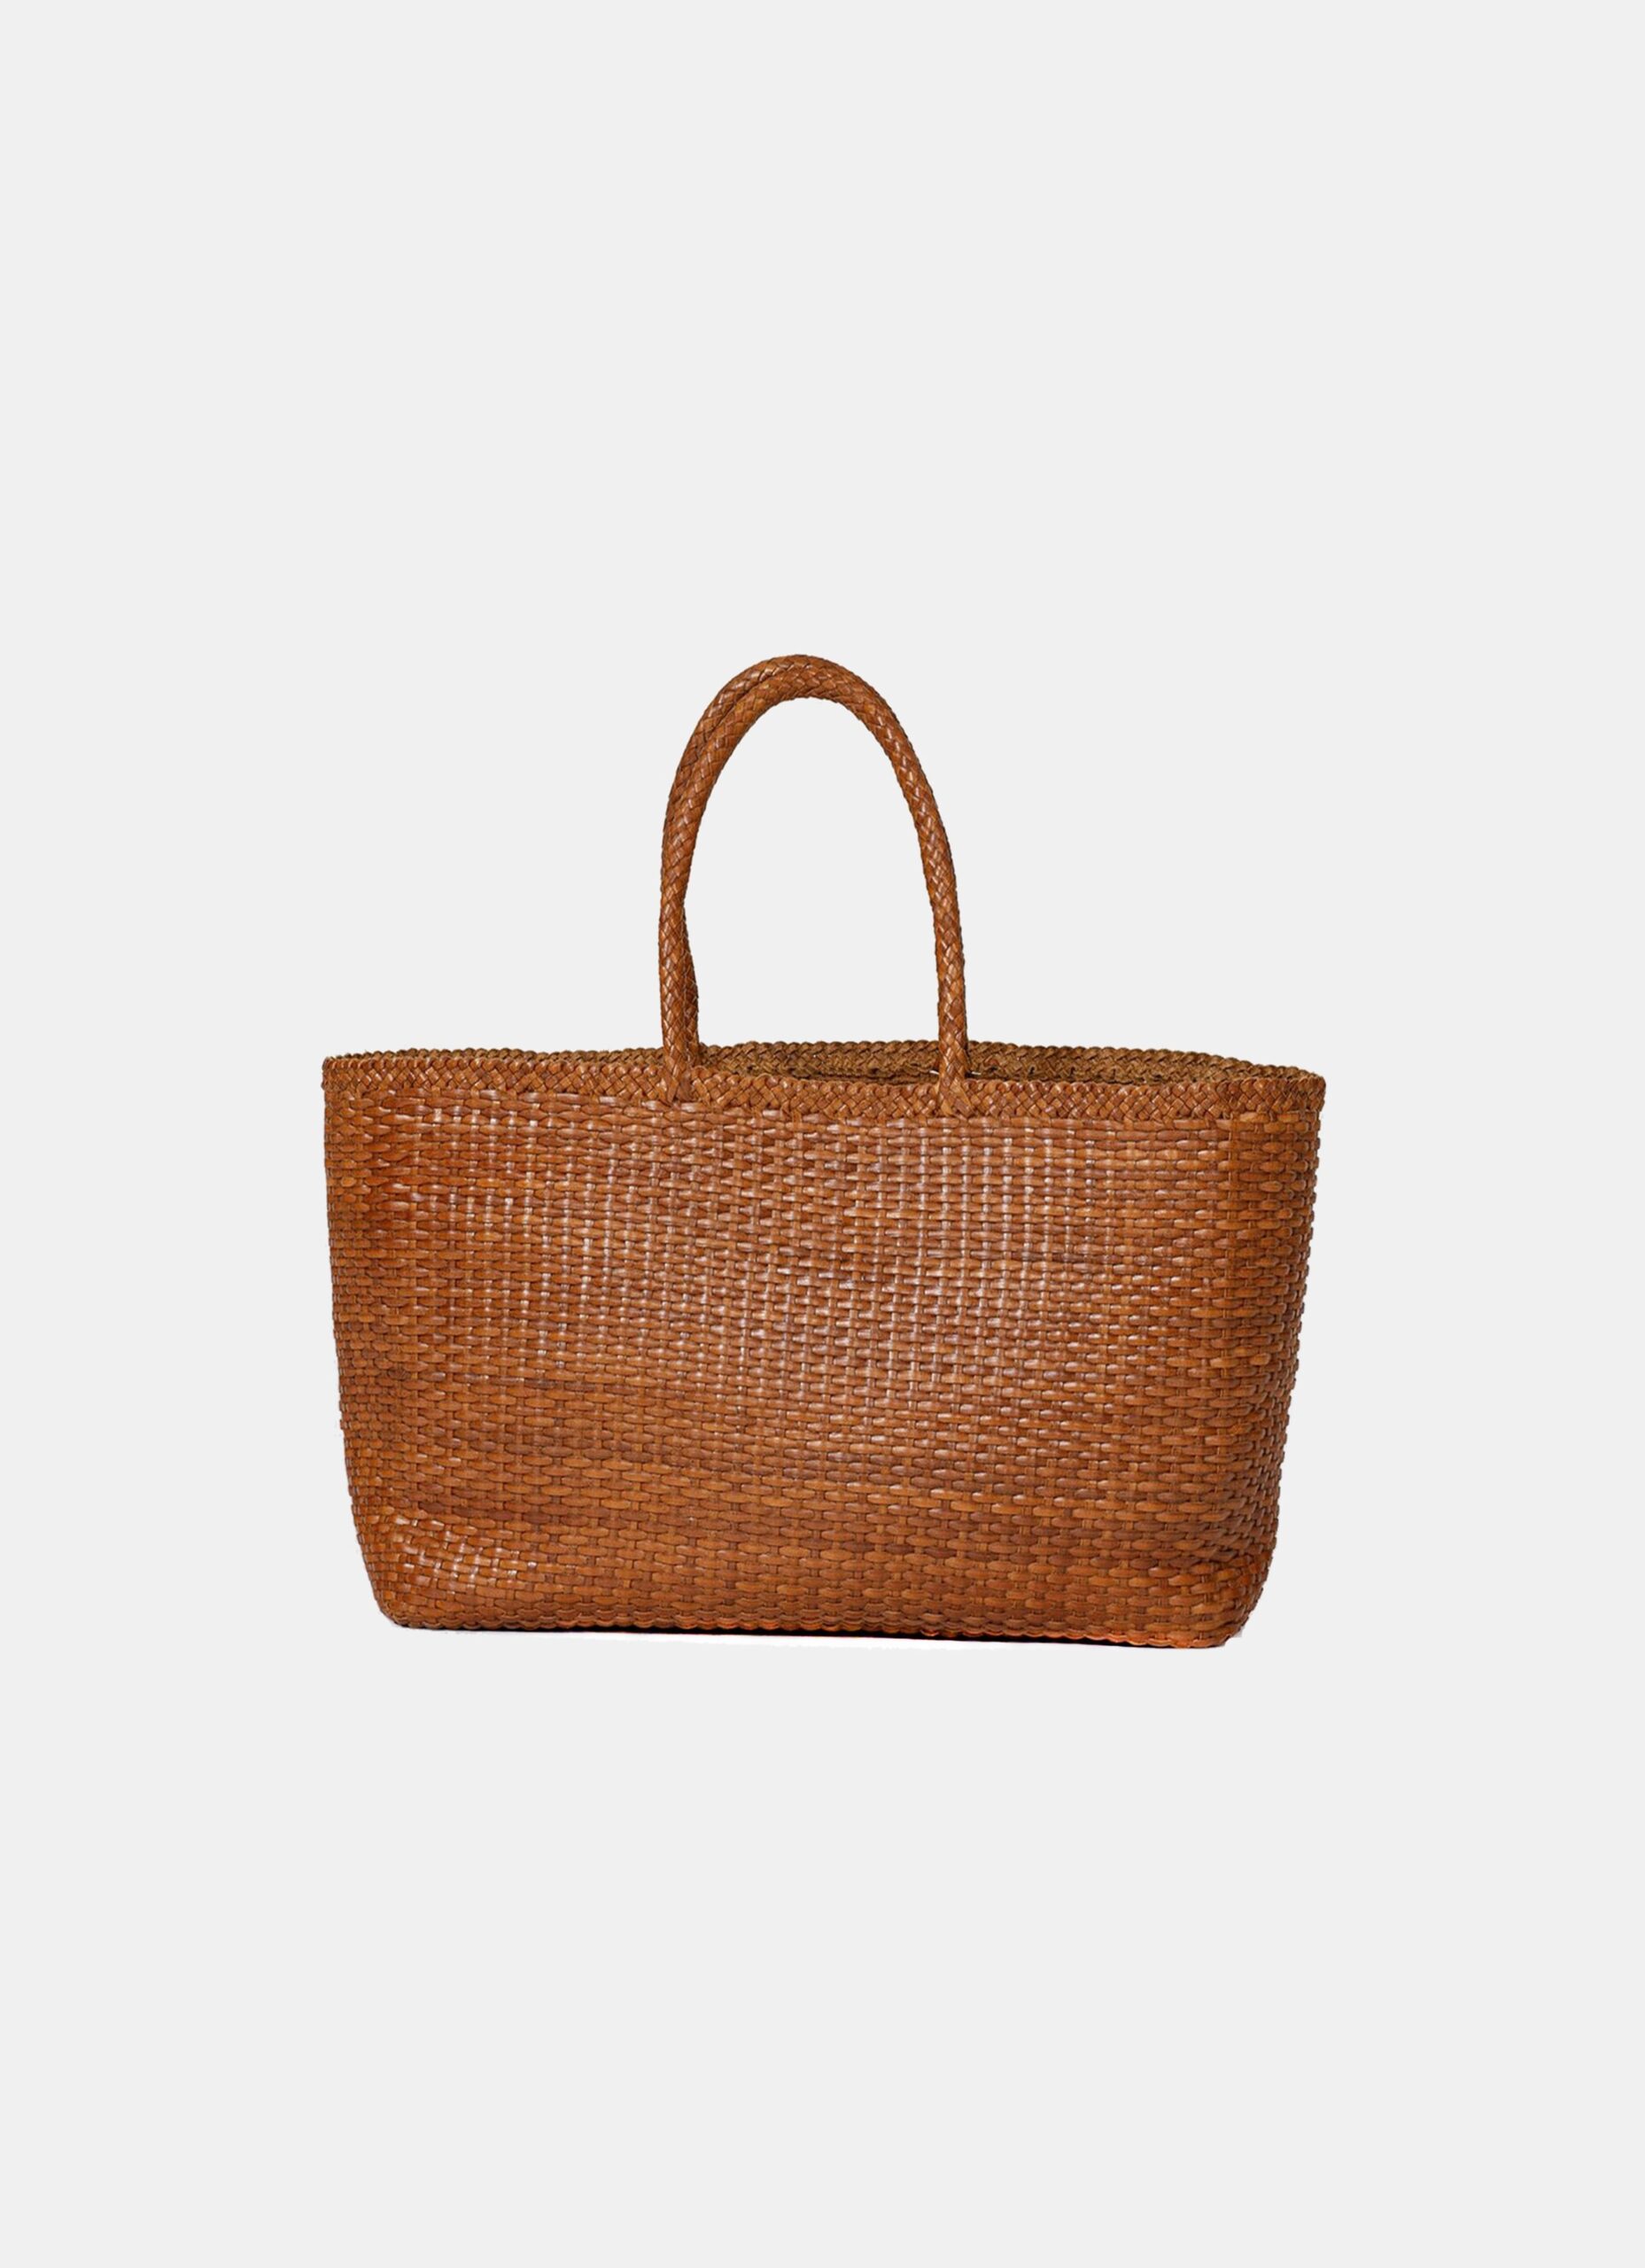 Dragon Diffusion - Handwoven Leather Basket - Weave Tote - Tan